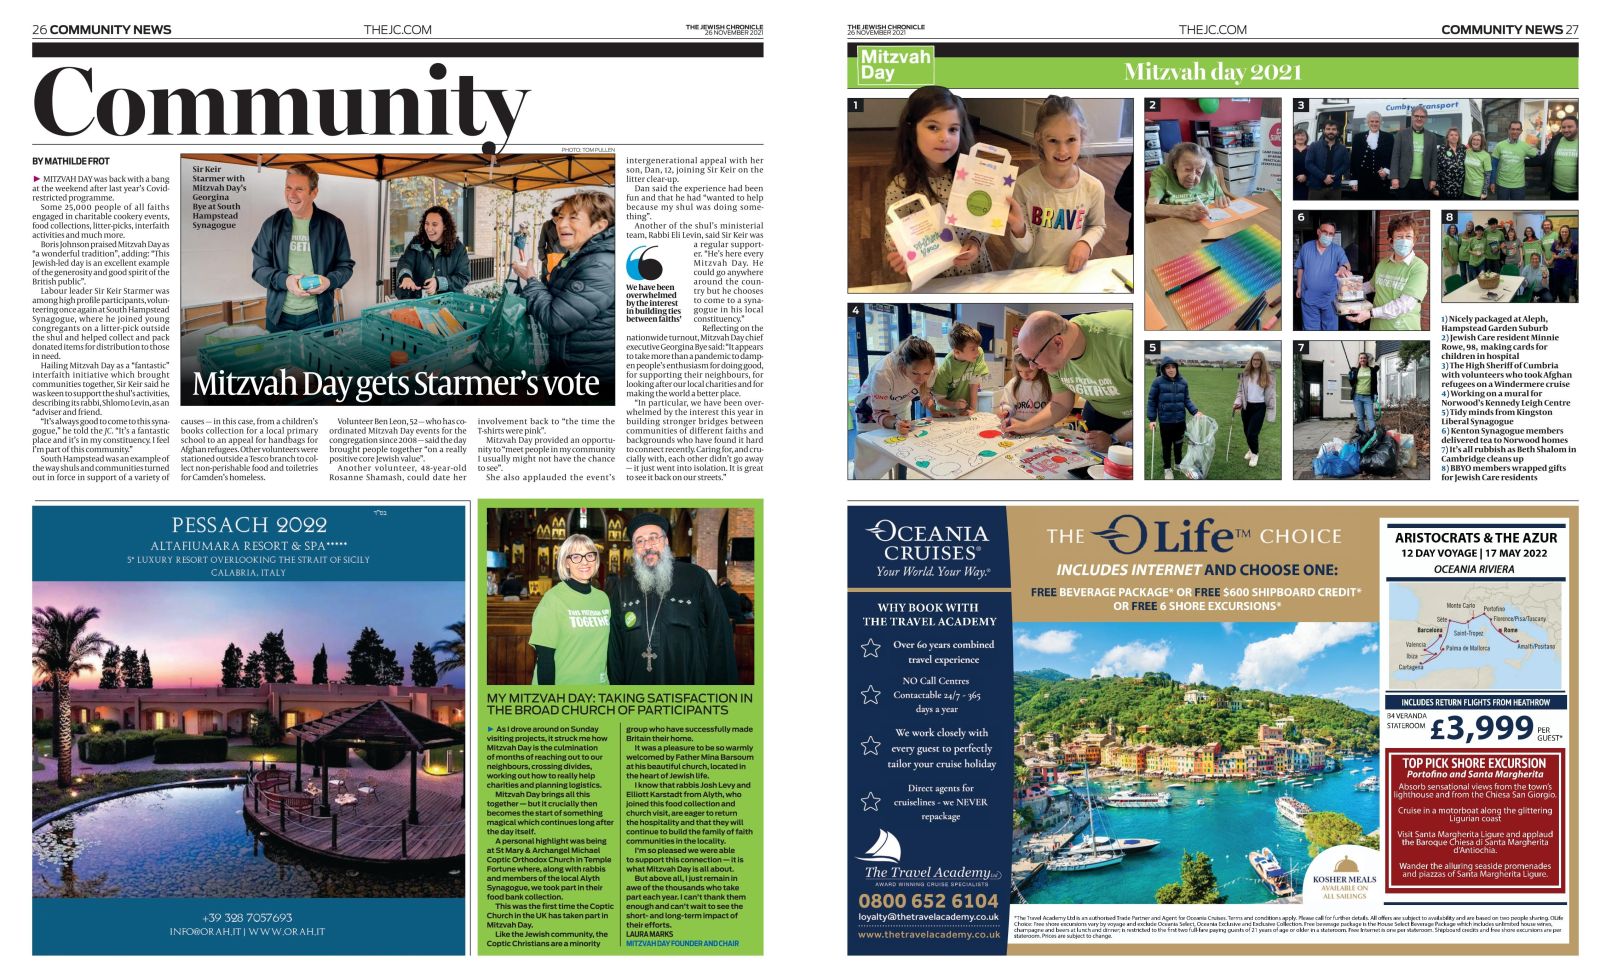 Eight page special on Mitzvah Day in the Jewish Chronicle